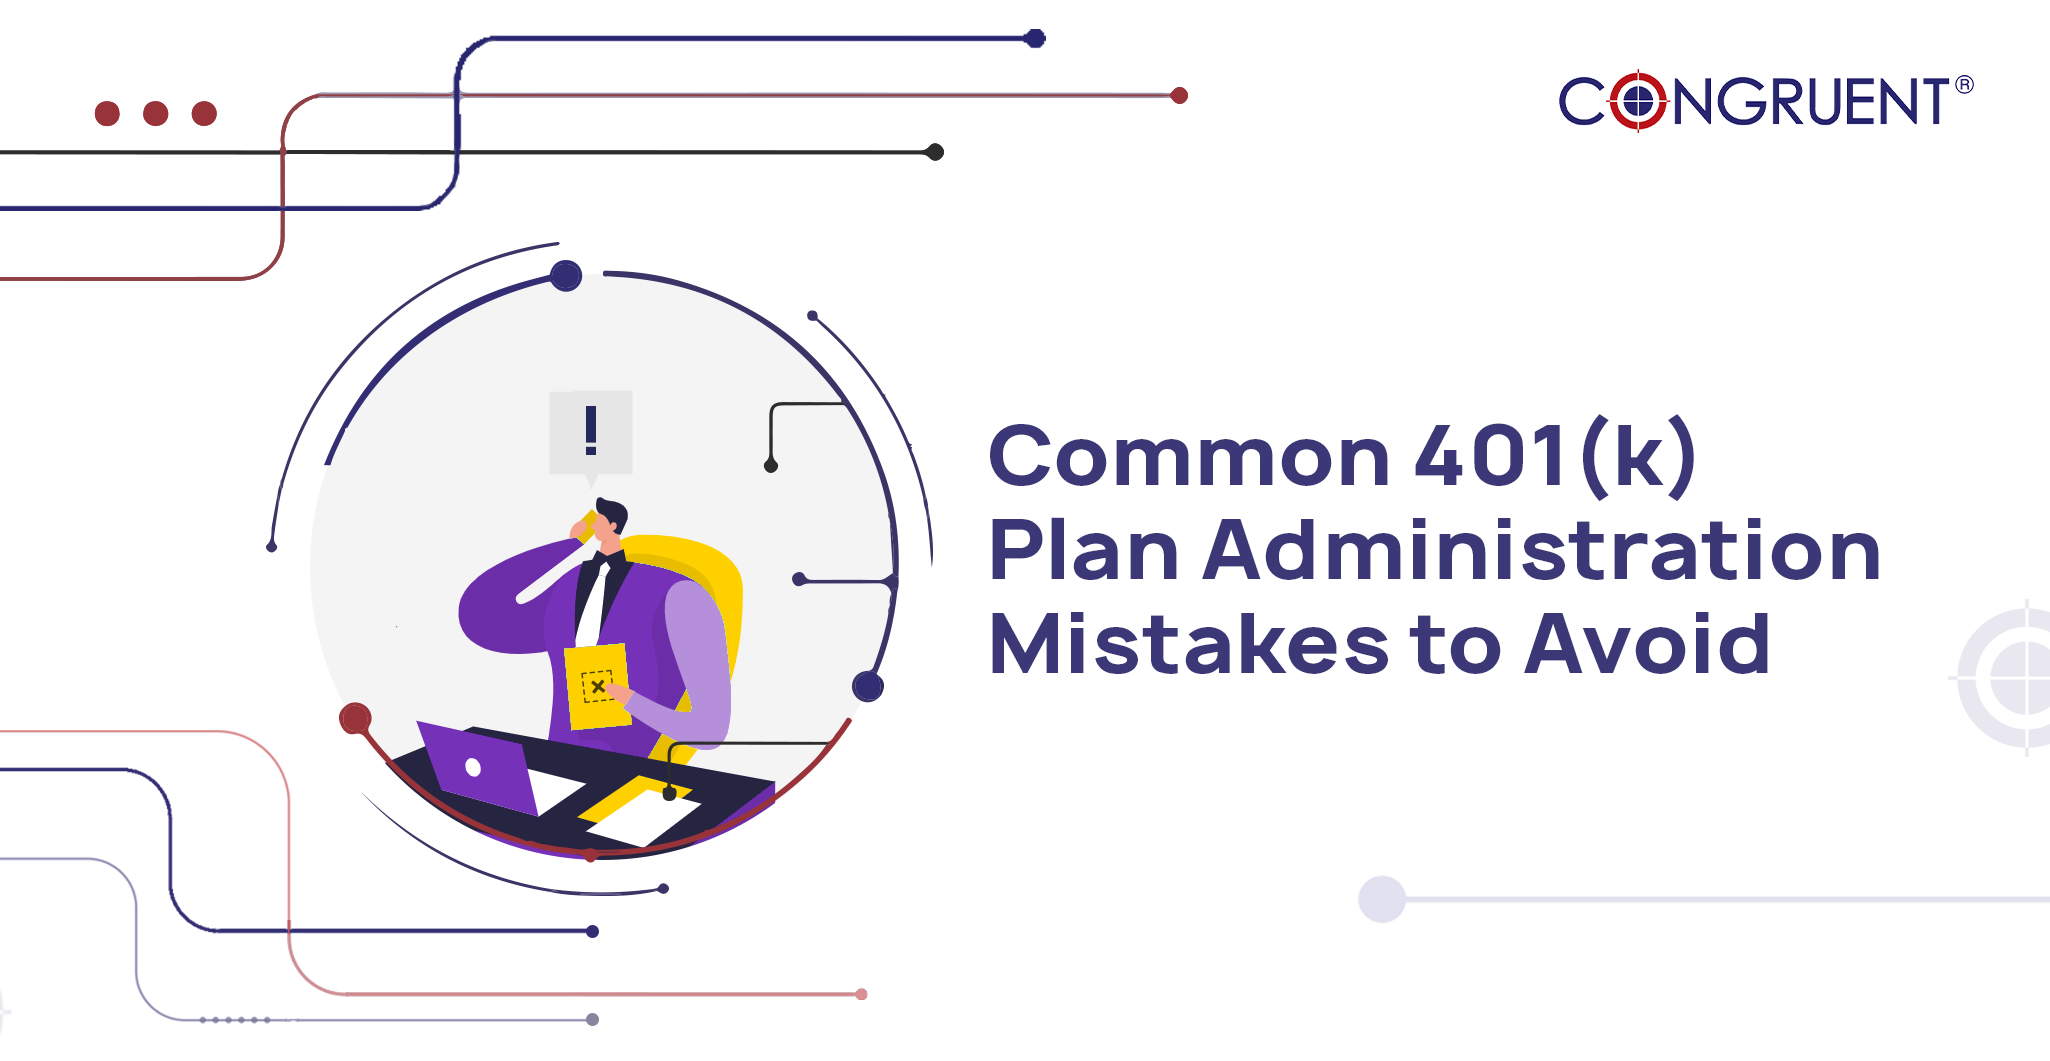 Common 401(k) Plan Administration Mistakes to Avoid